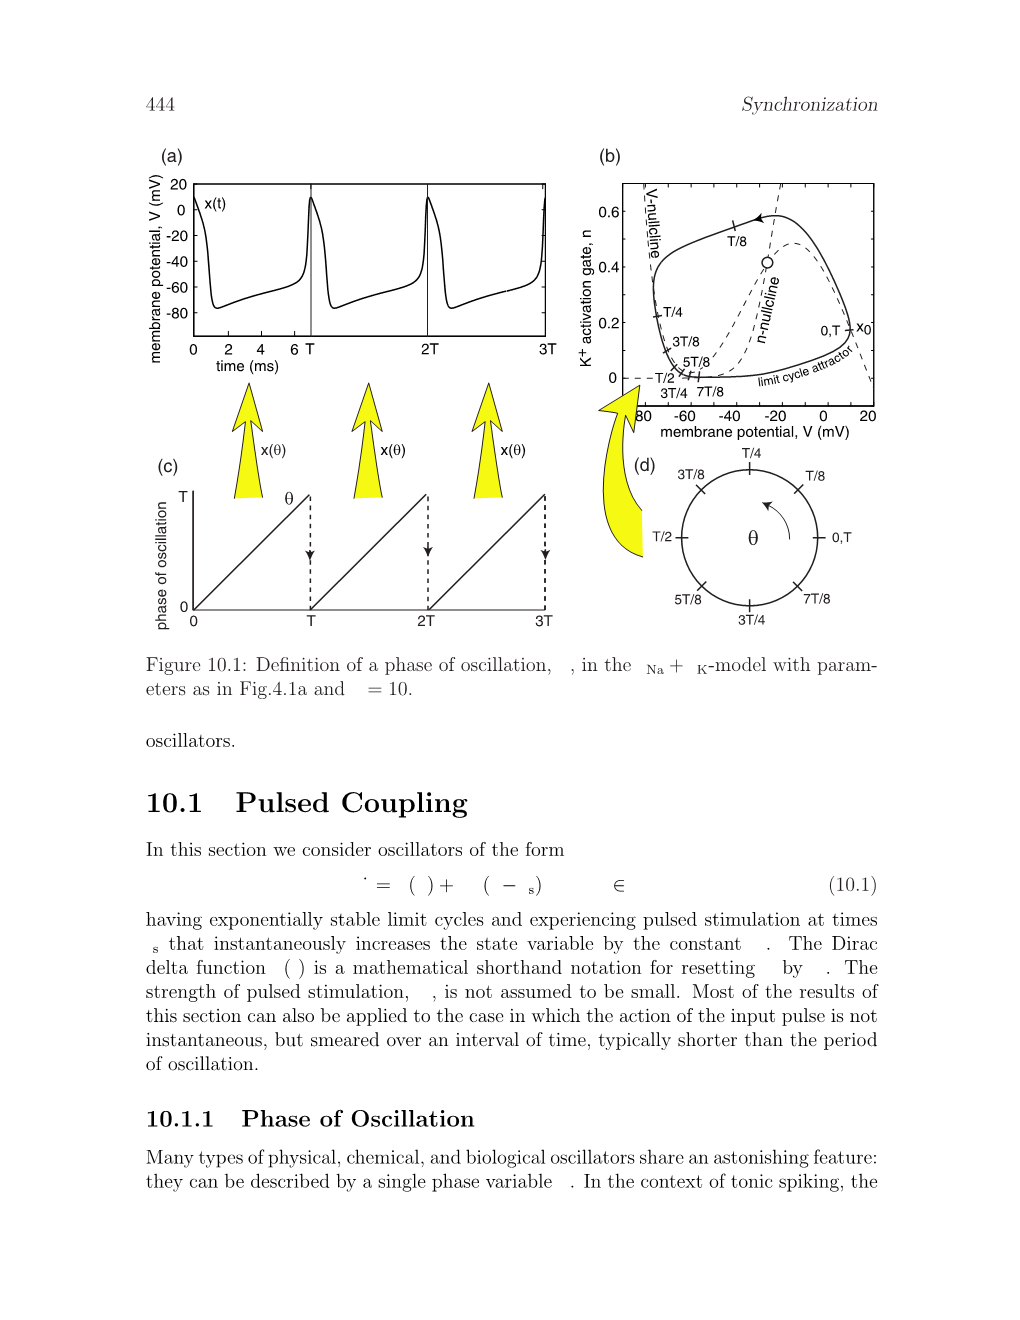 10.1 Pulsed Coupling